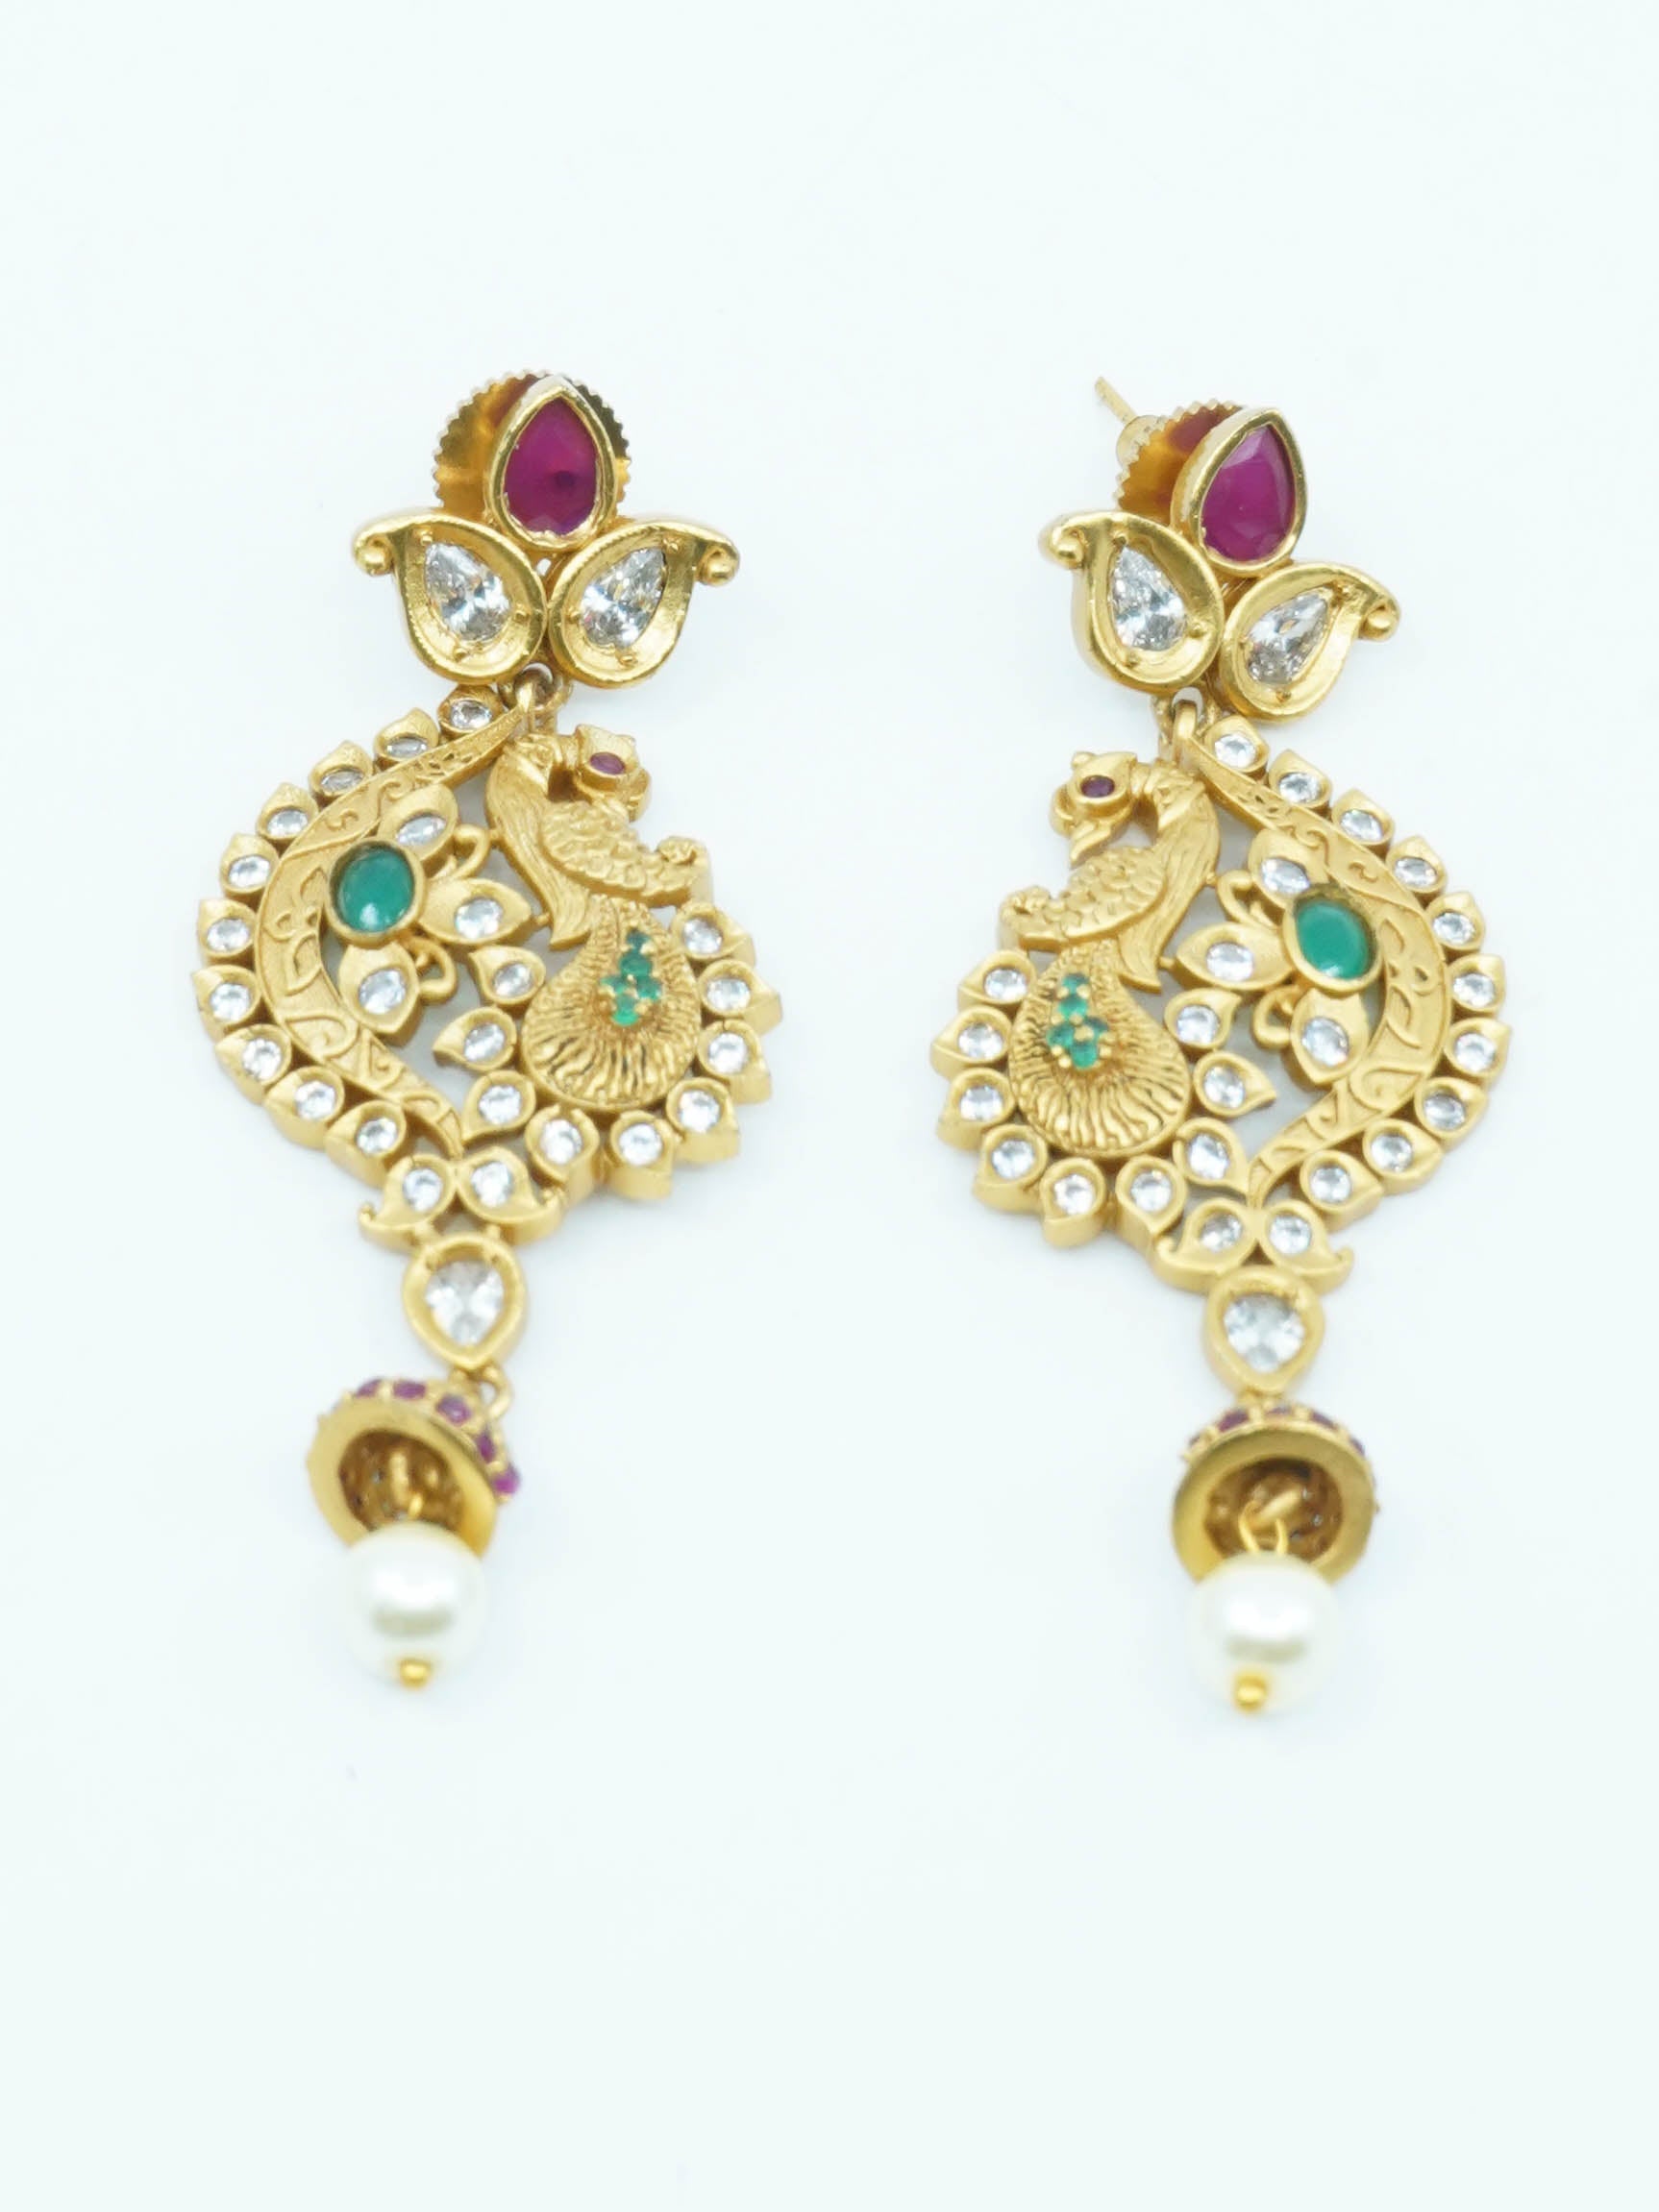 Antique Gold Finish Multi Color Stone Studded Peacock Pendant Set with pearl drops PPN11-690-3451N